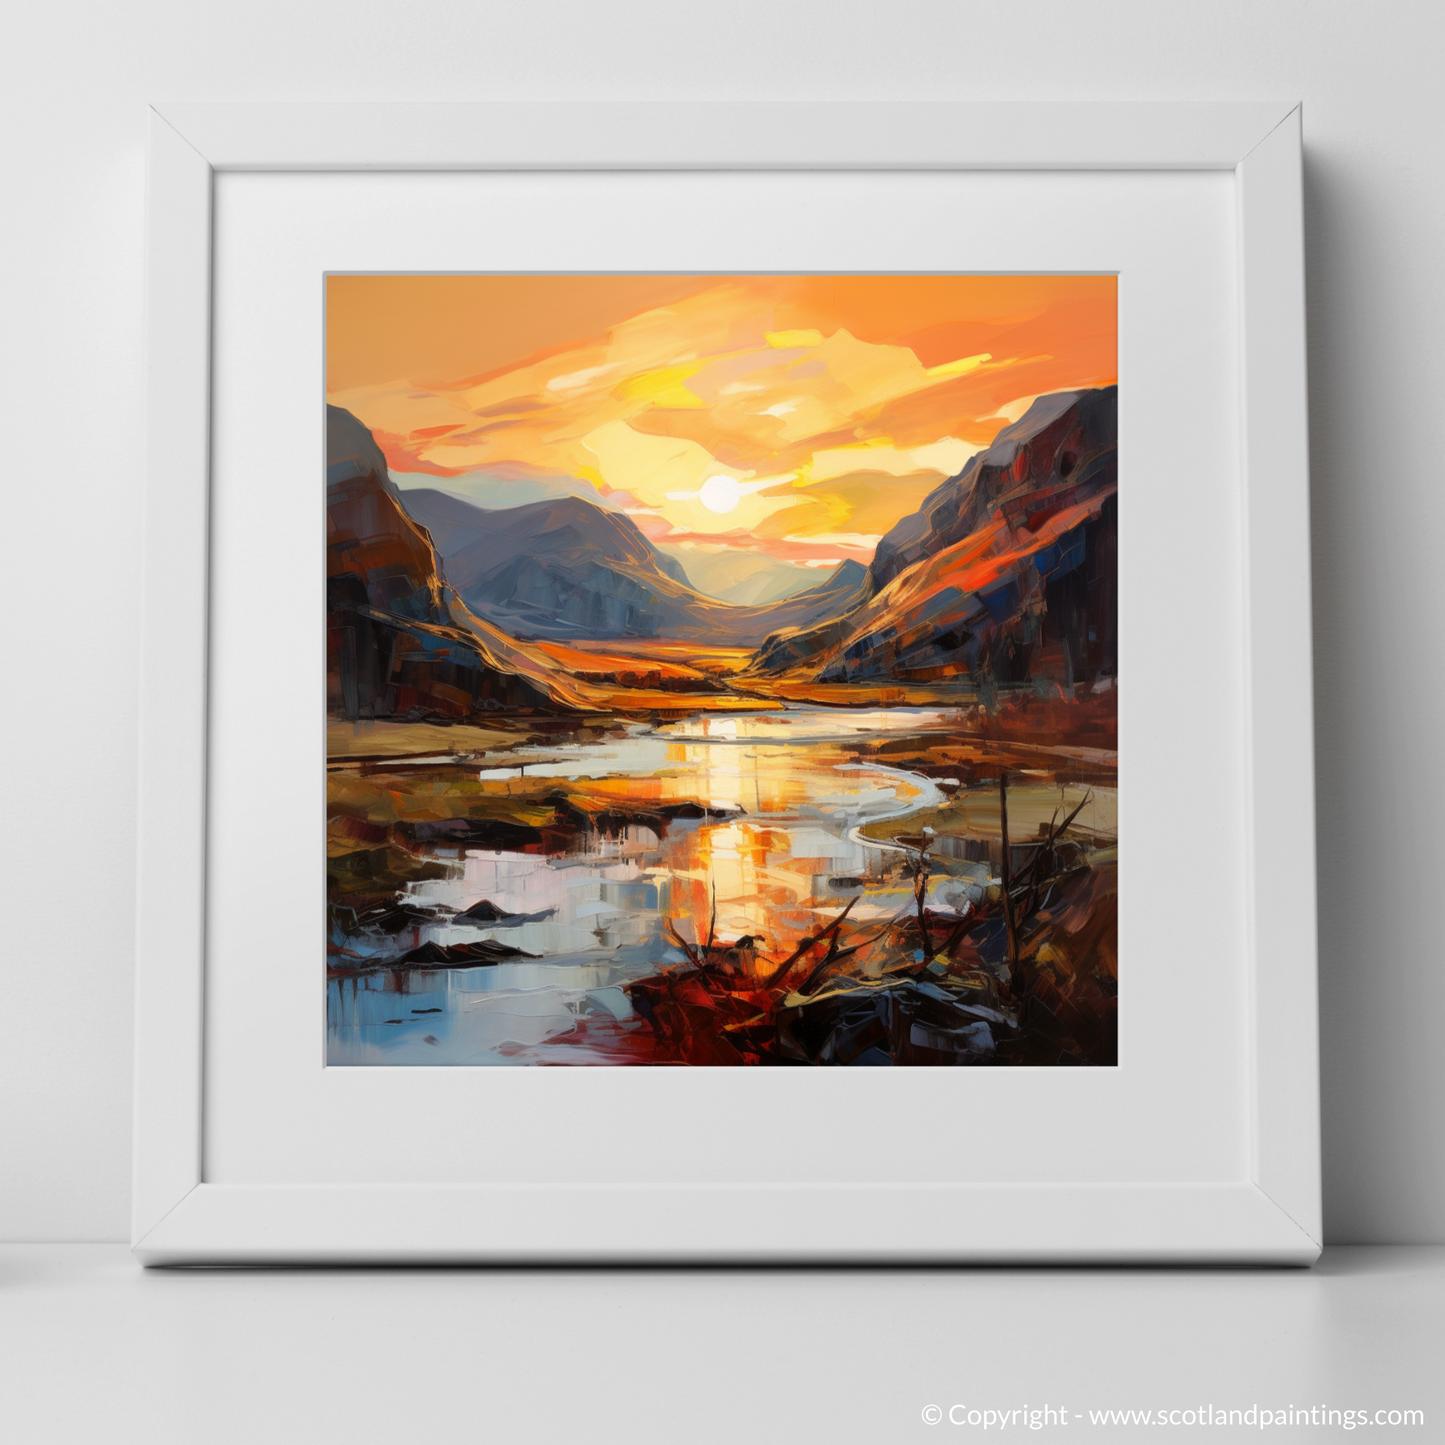 Art Print of Sunset glow in Glencoe with a white frame